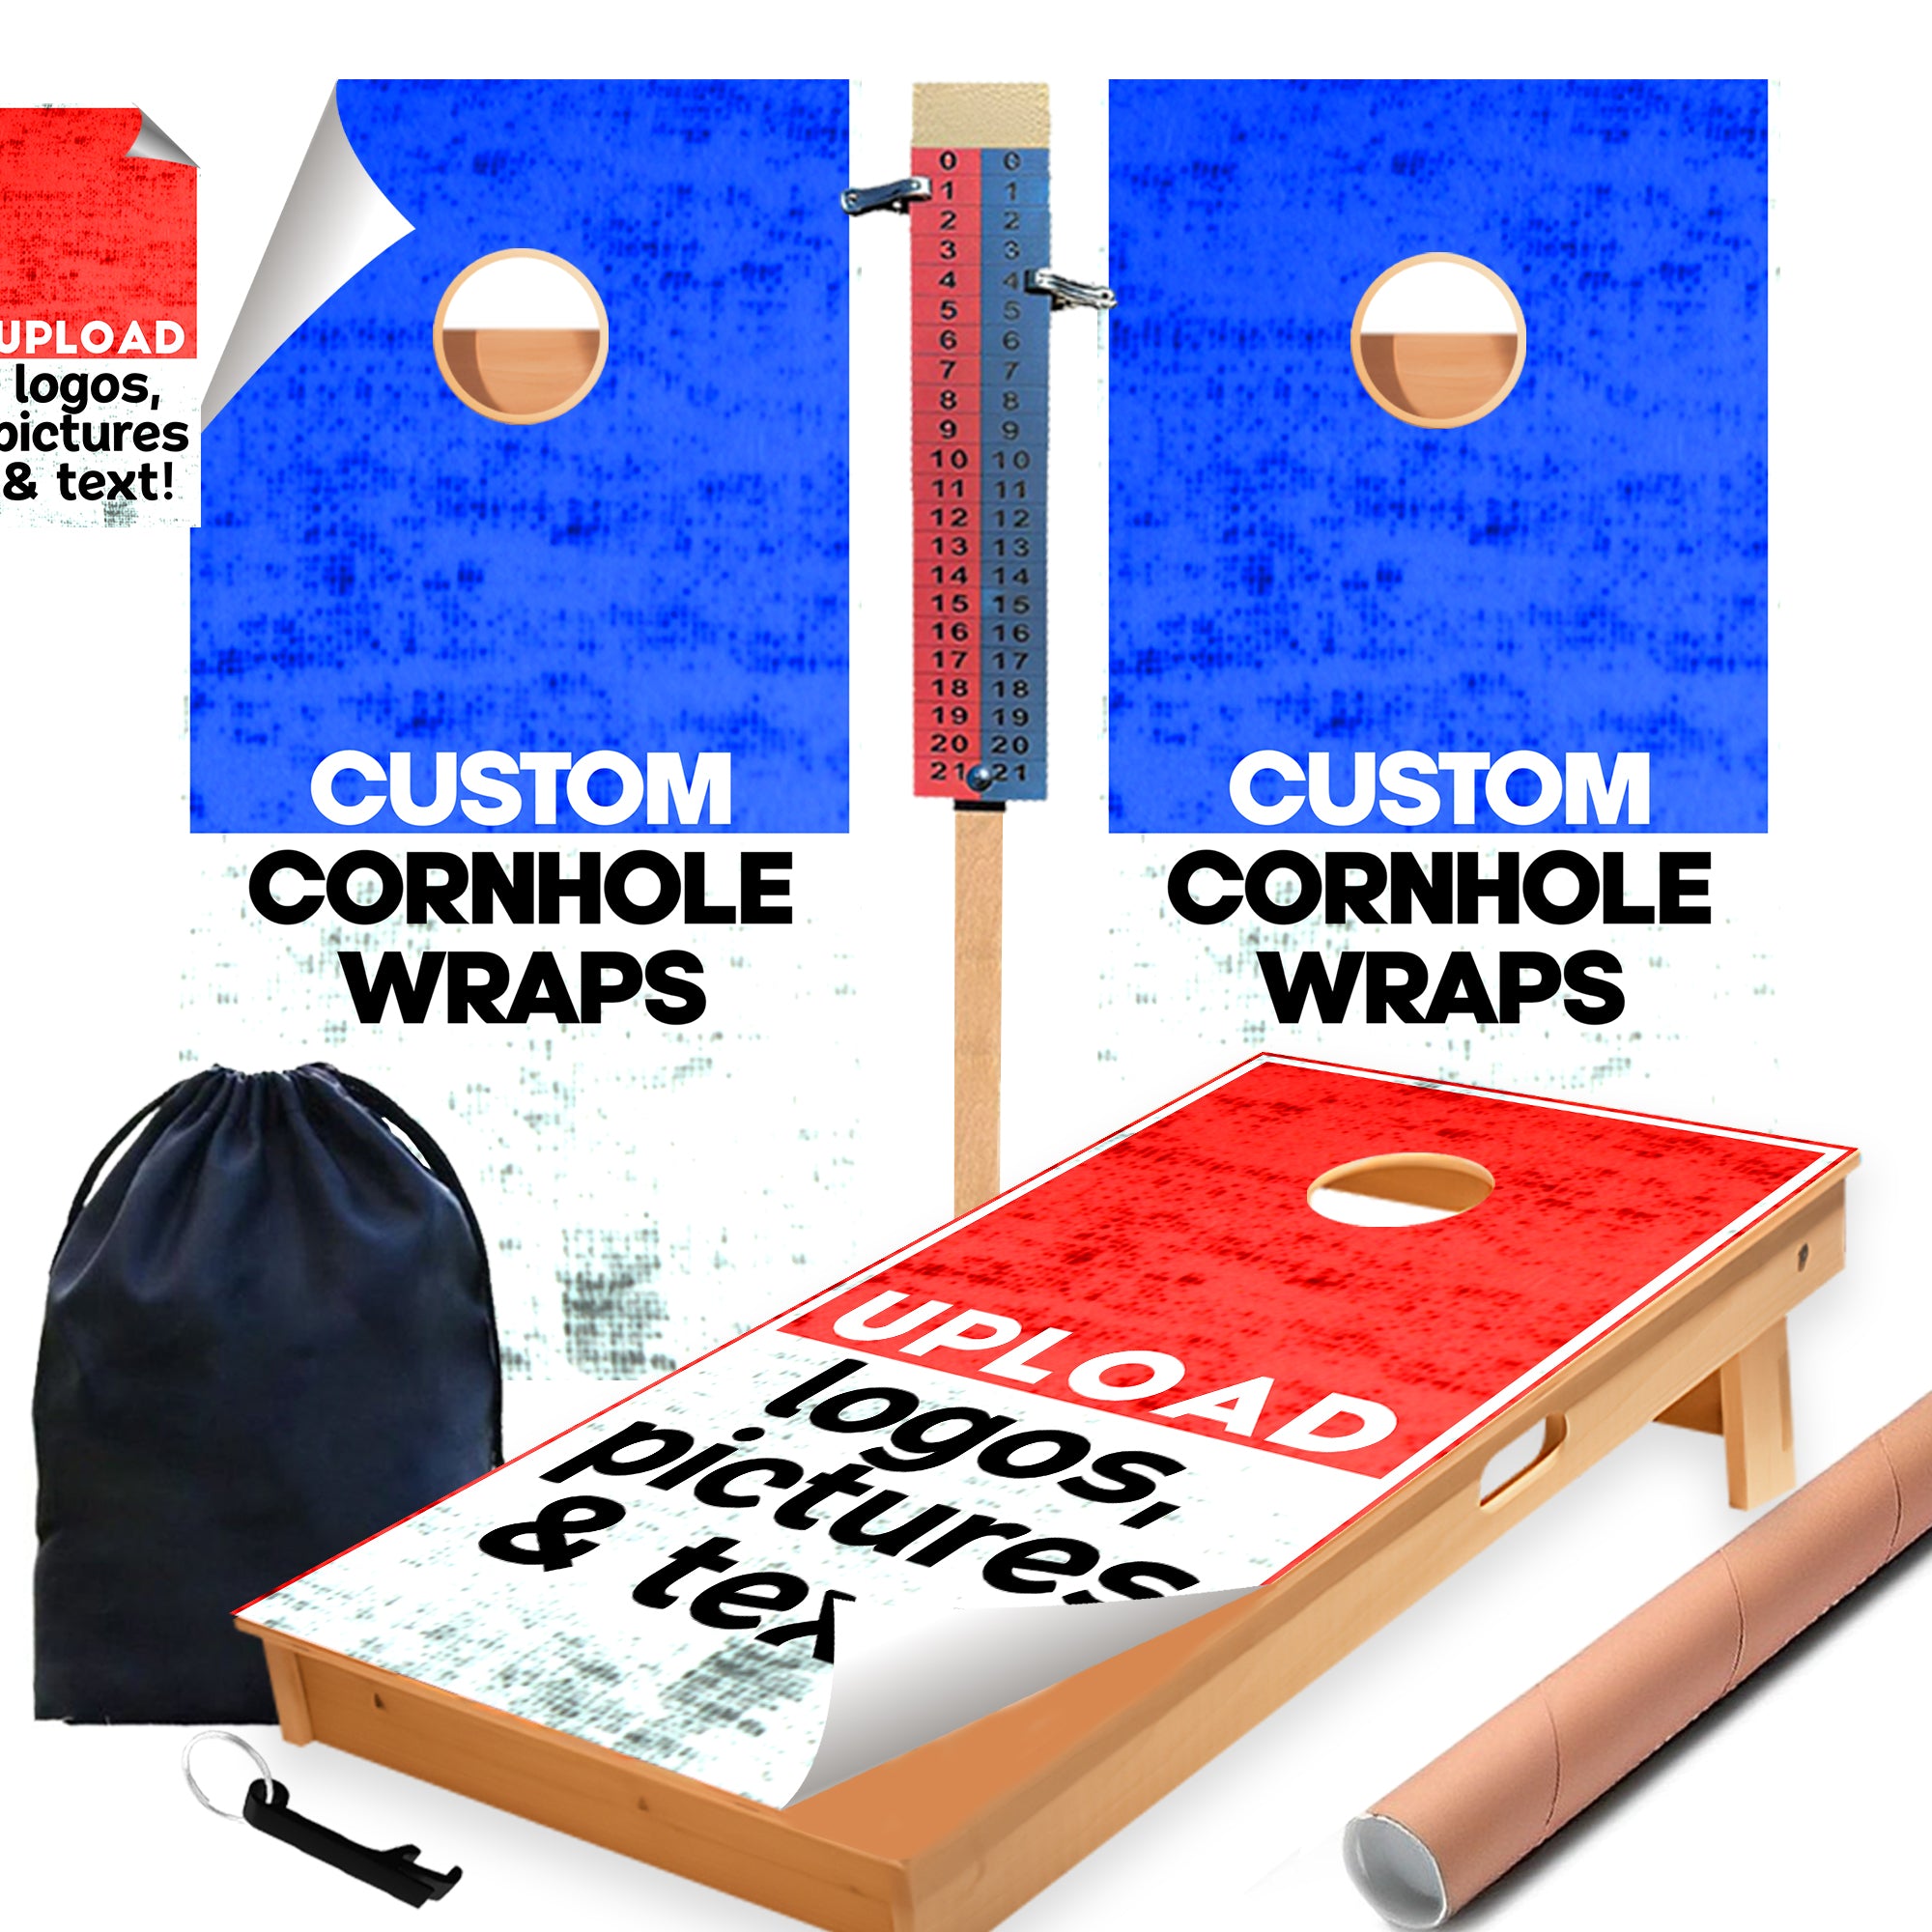 Customize Your Own Cornhole Boards Wraps (Set of 2)